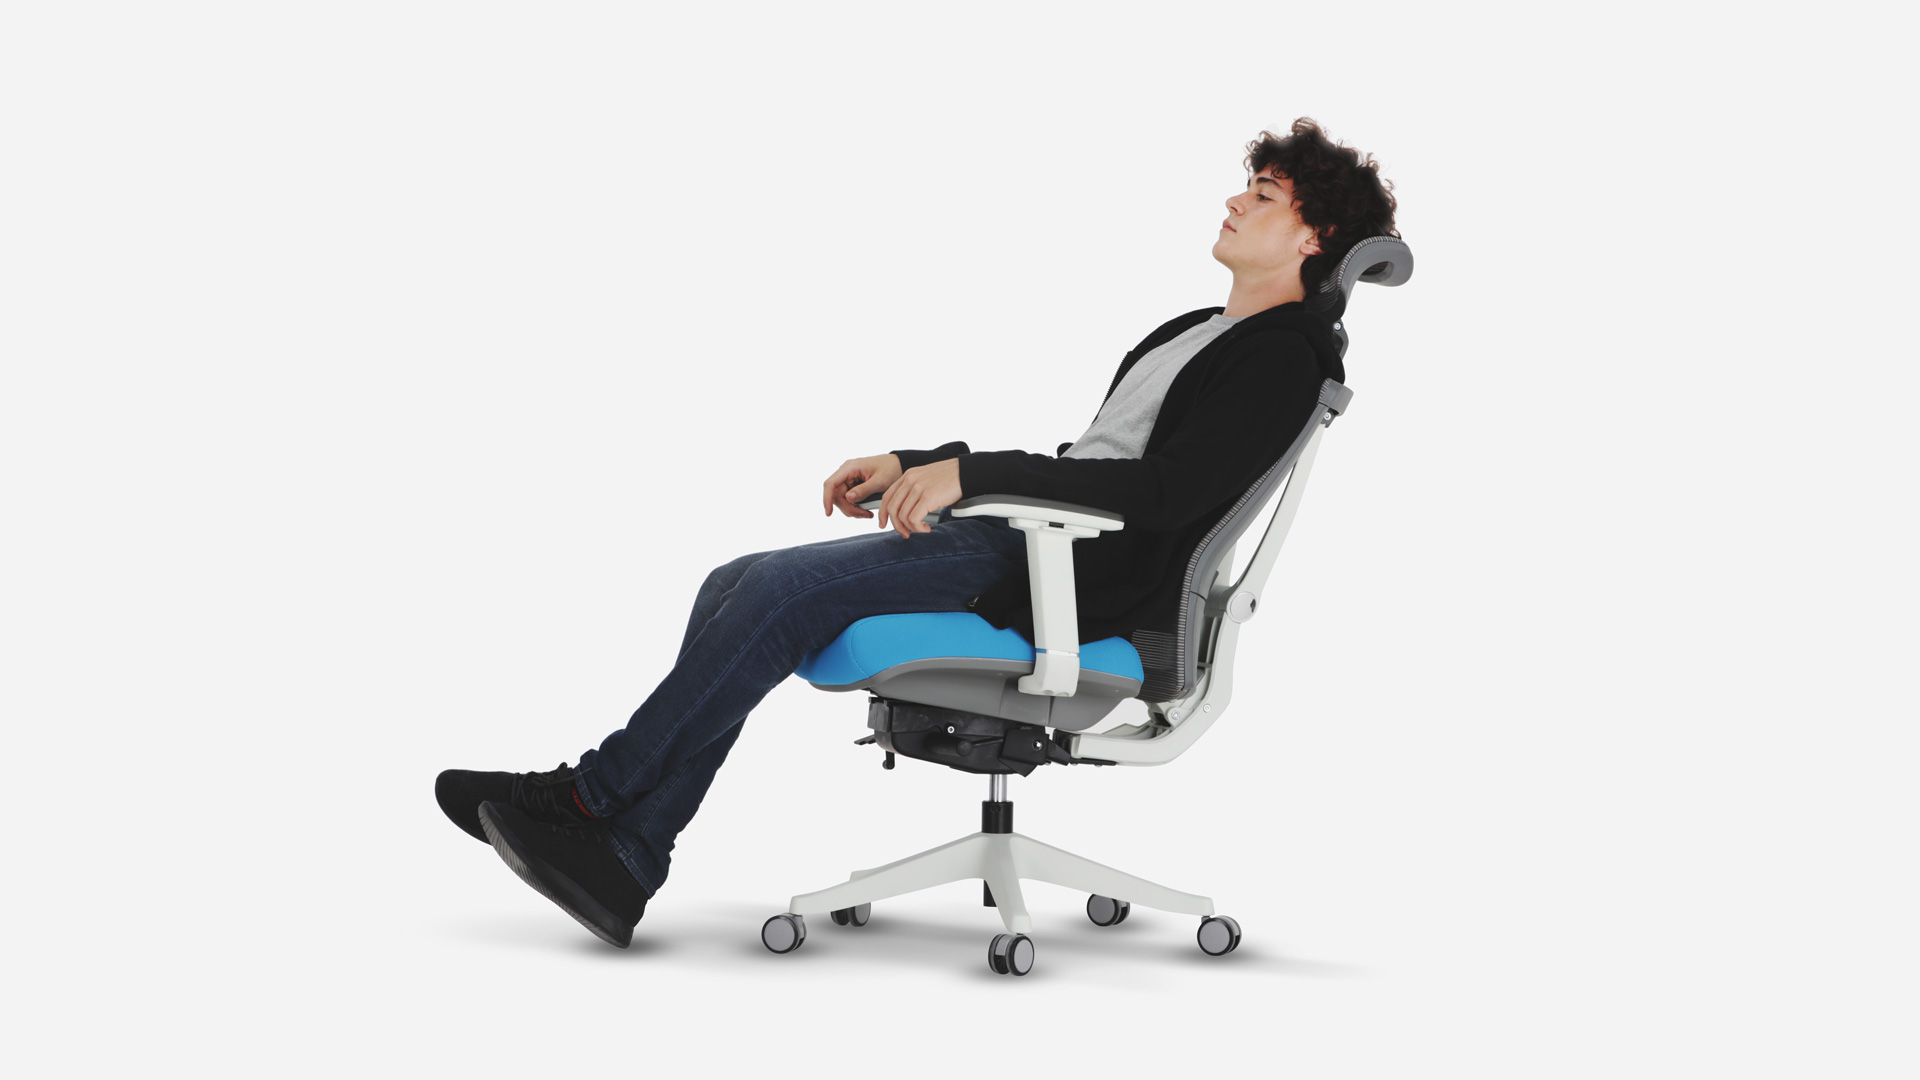 15 Best Ergonomic Chair Designs For Work And Home